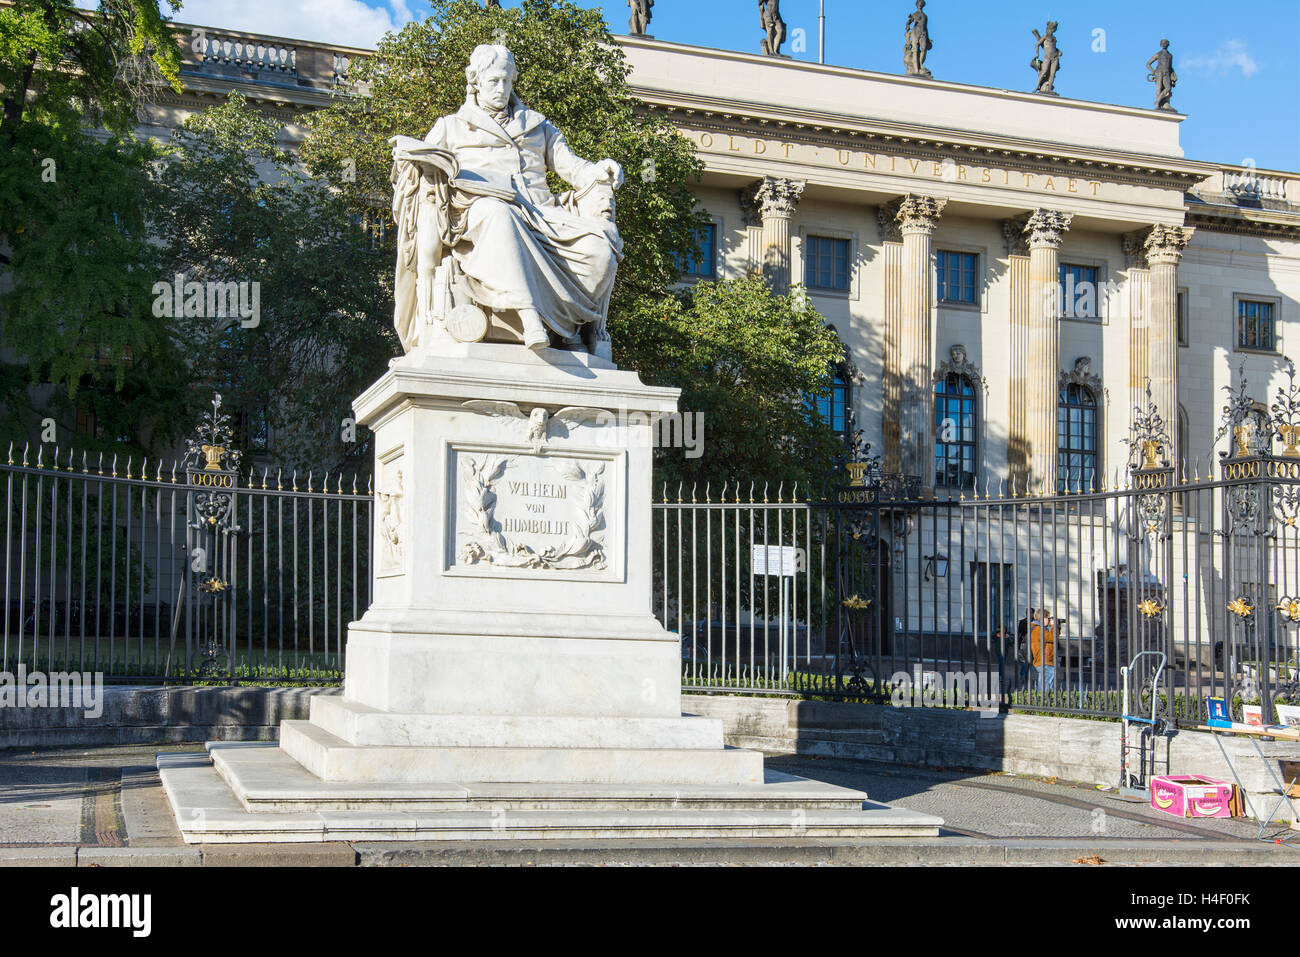 The statue in front of the Humboldt University in Berlin Stock Photo